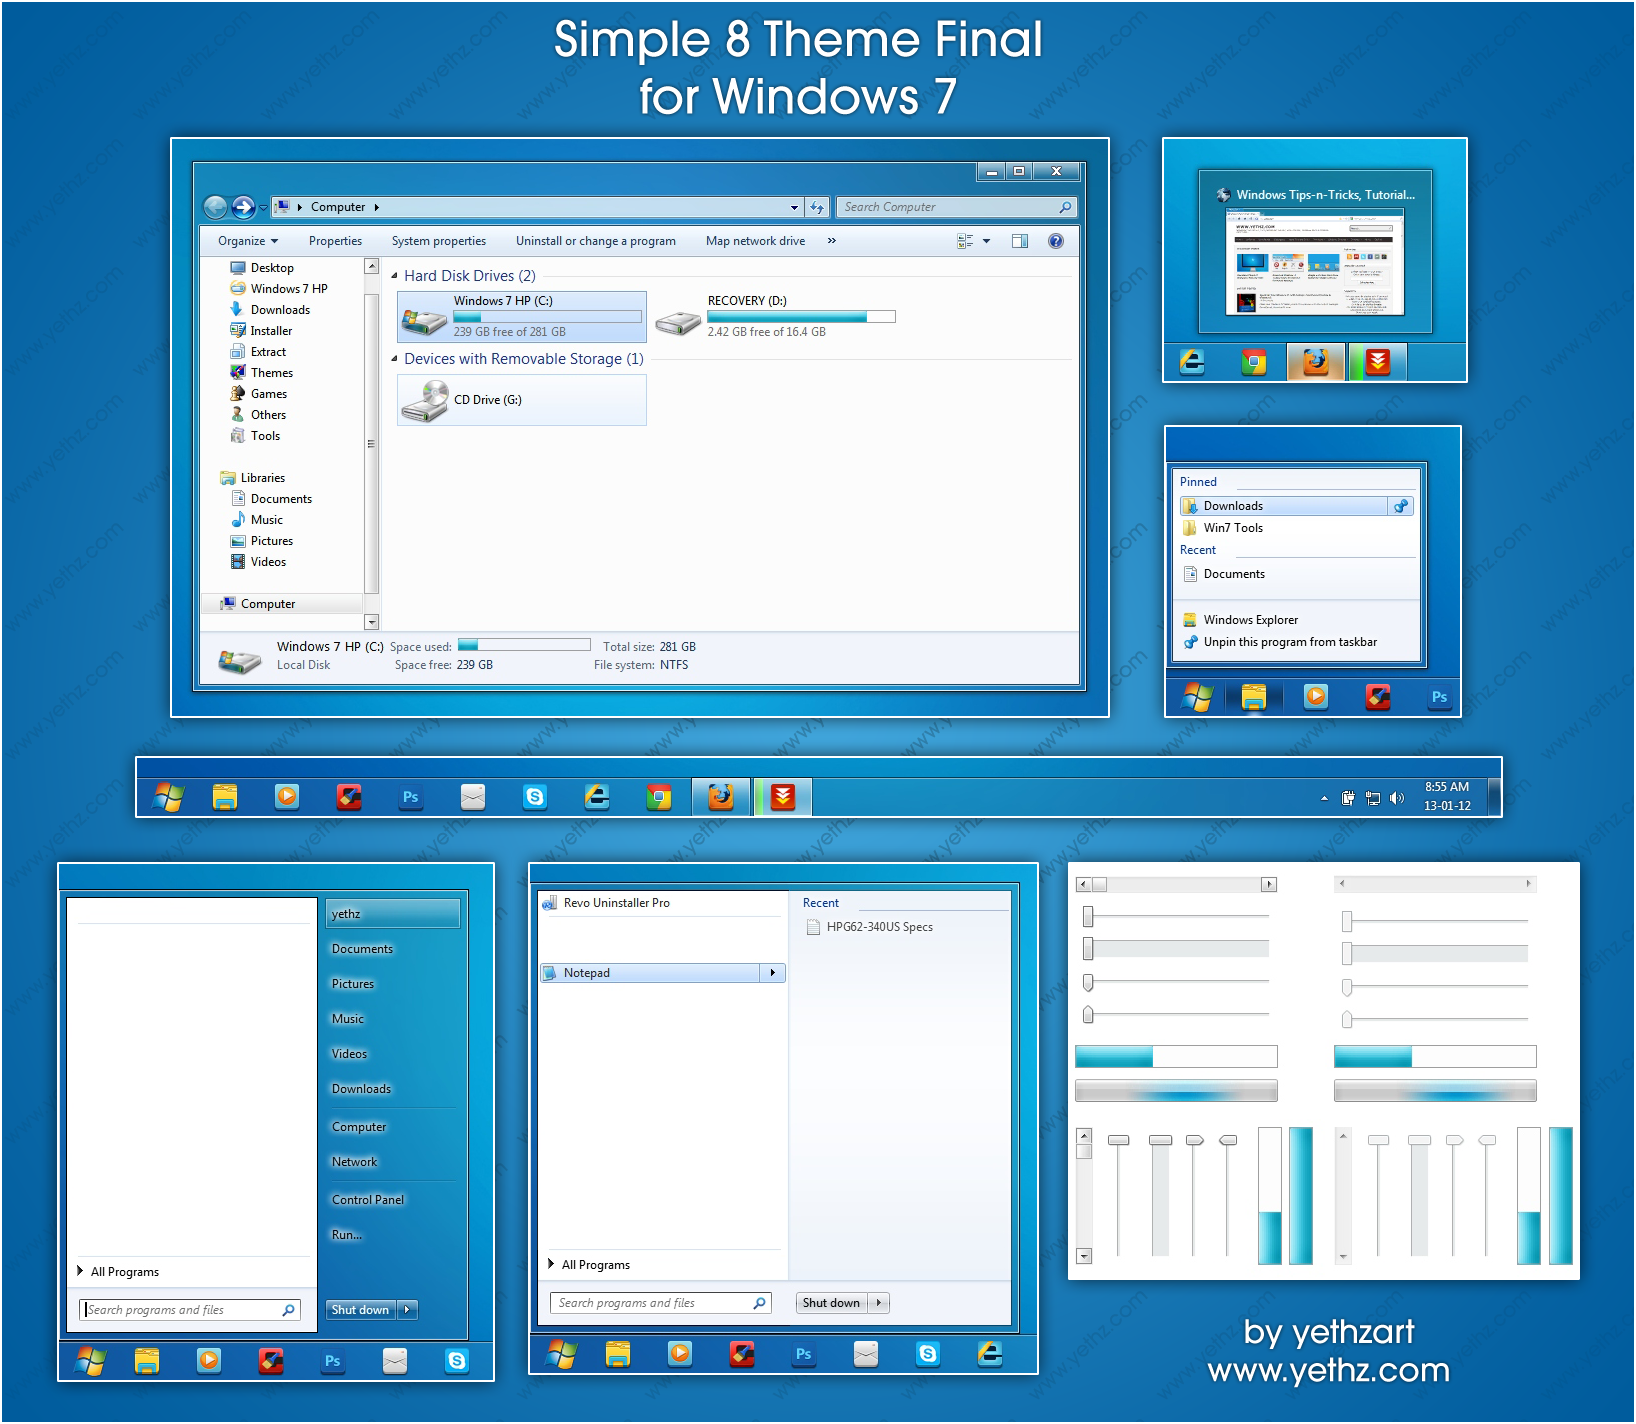 Simple 8 Theme Final for Windows 7